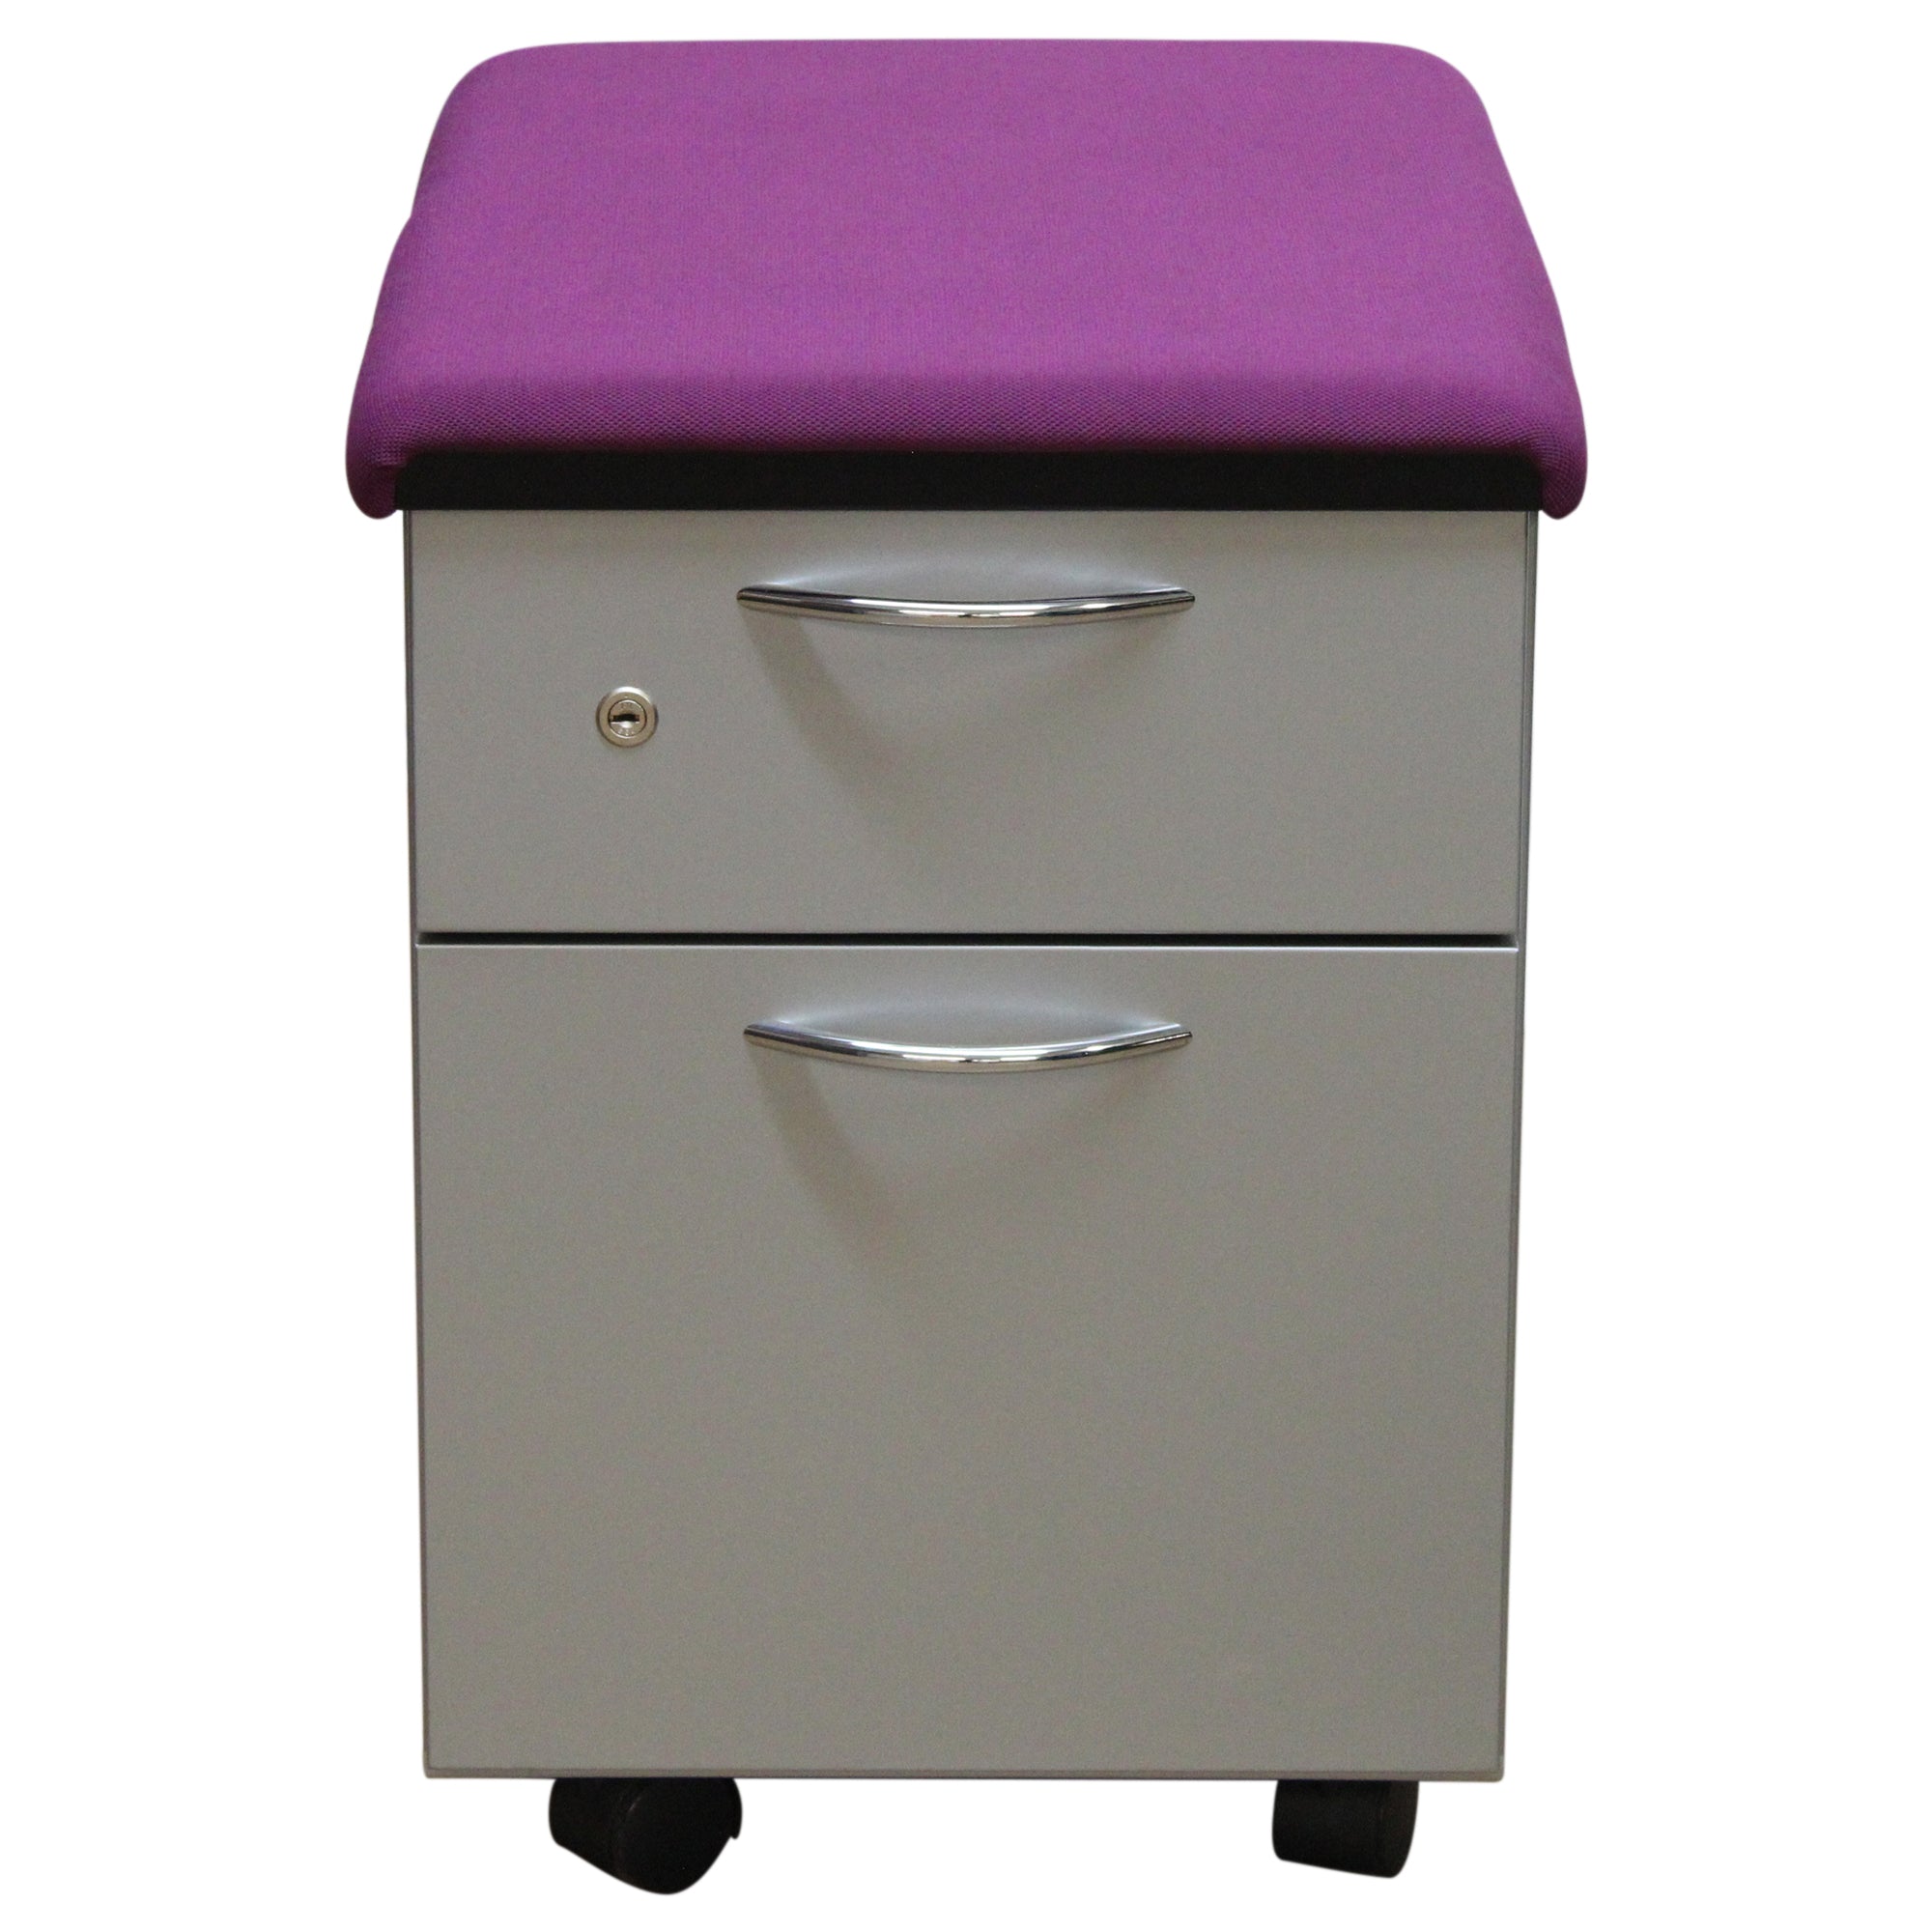 Steelcase 2-Drawer Mobile Pedestal with Cushion, Grey & Purple - Preowned